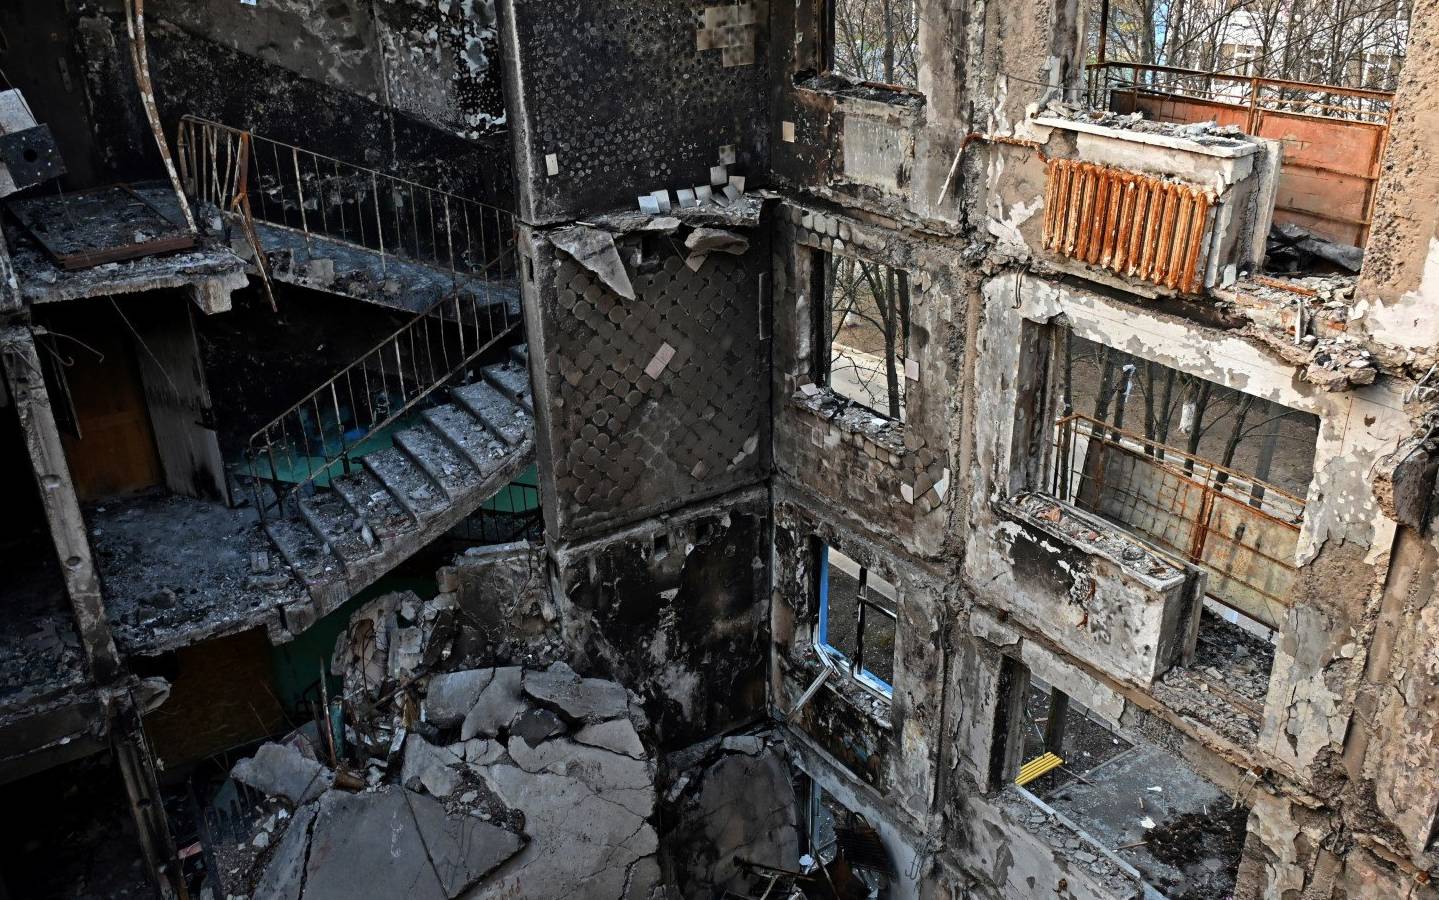 This photograph shows a partially destroyed five storey residential building in the Ukrainian city of Kharkiv, on April 10, 2022, amid the Russian invasion of Ukraine. (Photo by SERGEY BOBOK / AFP)